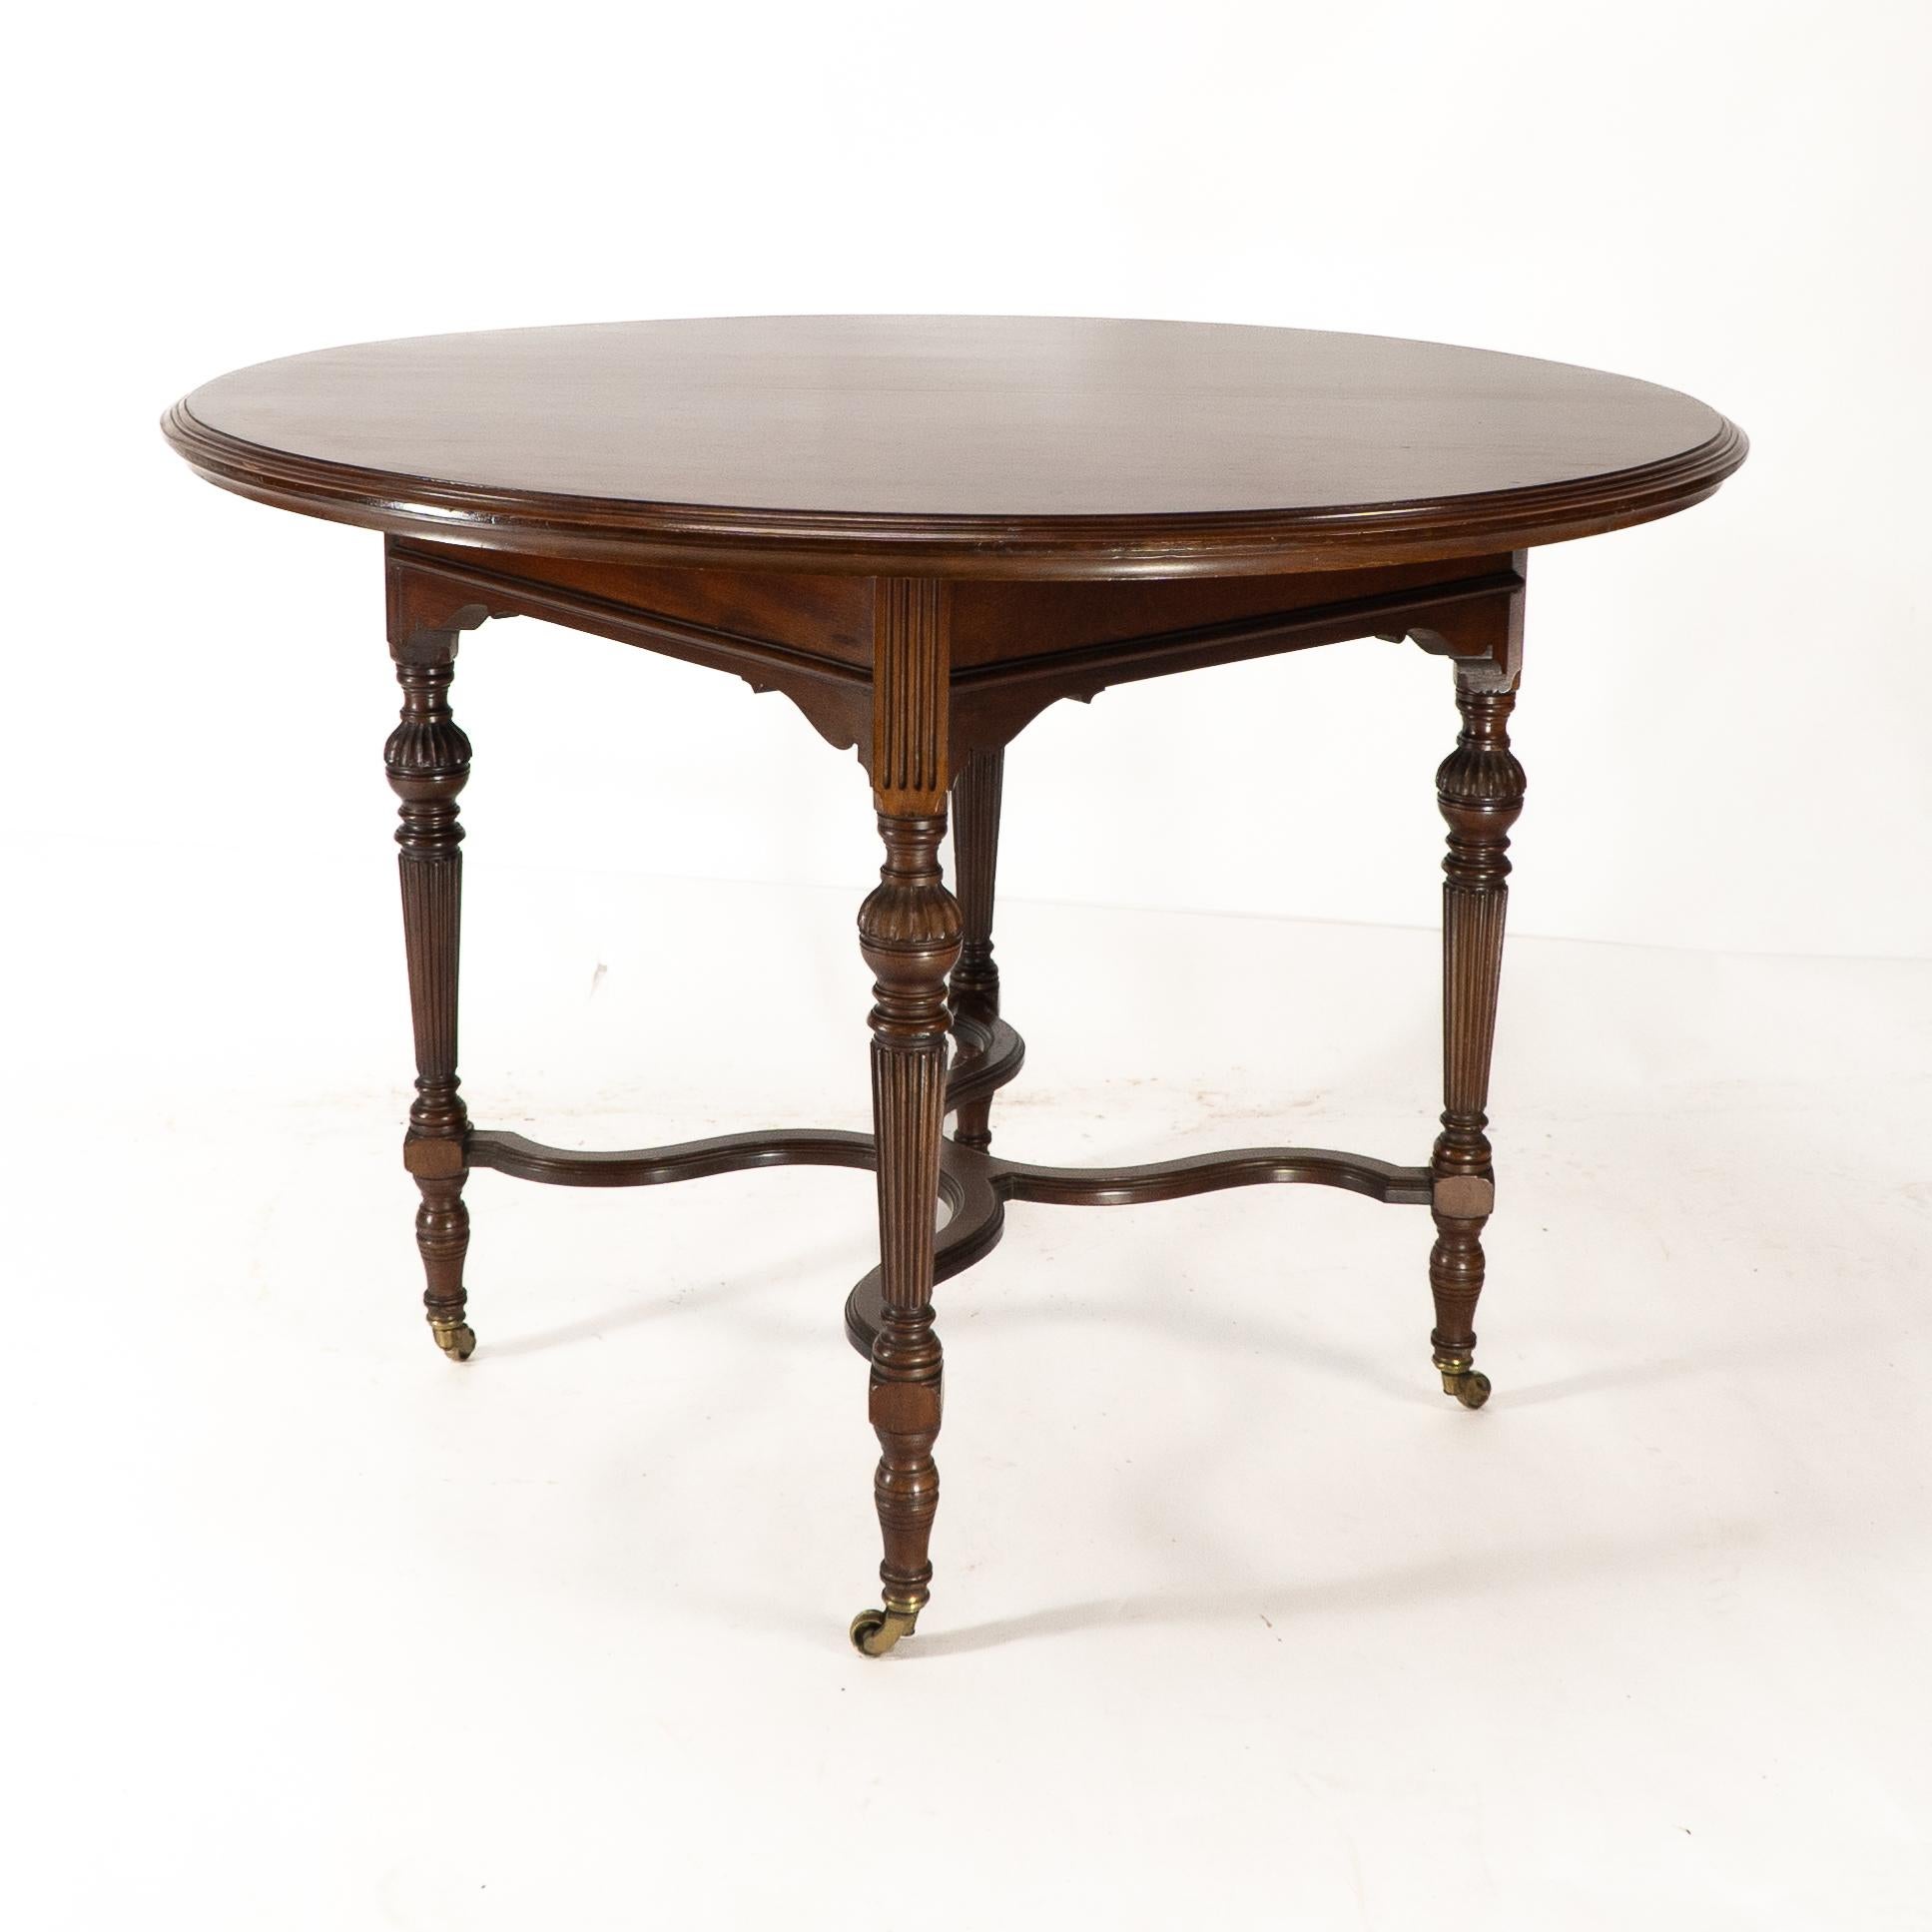 Collinson & Lock attributed. A fine quality Aesthetic Movement Walnut circular center table with a shaped apron & fluted legs united by serpentine stretchers.
